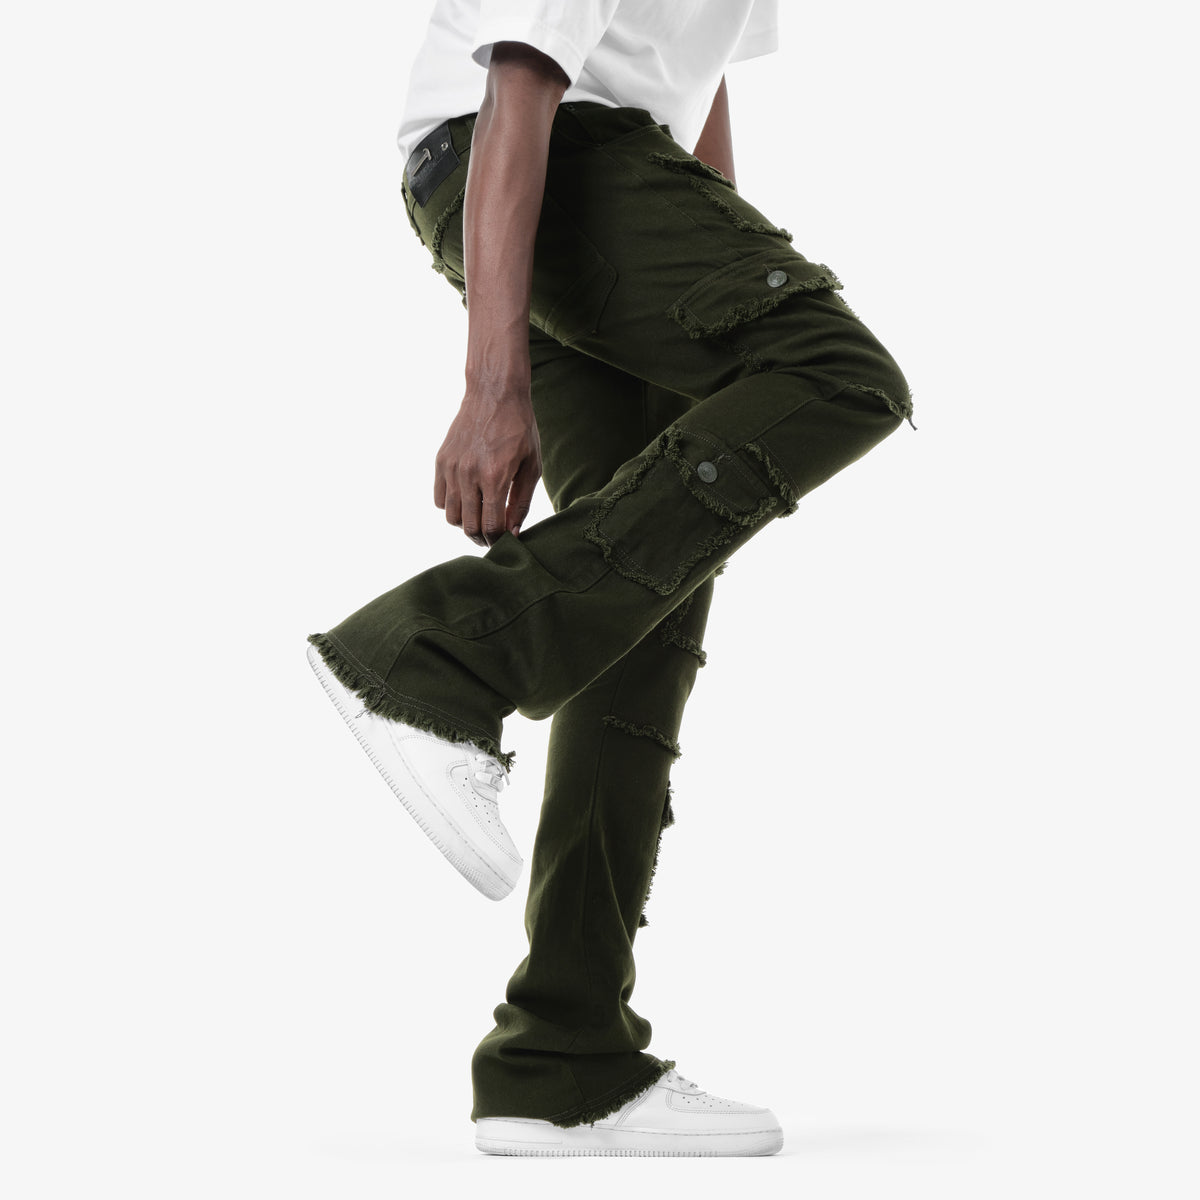 OLIVE STACKED CARGOS